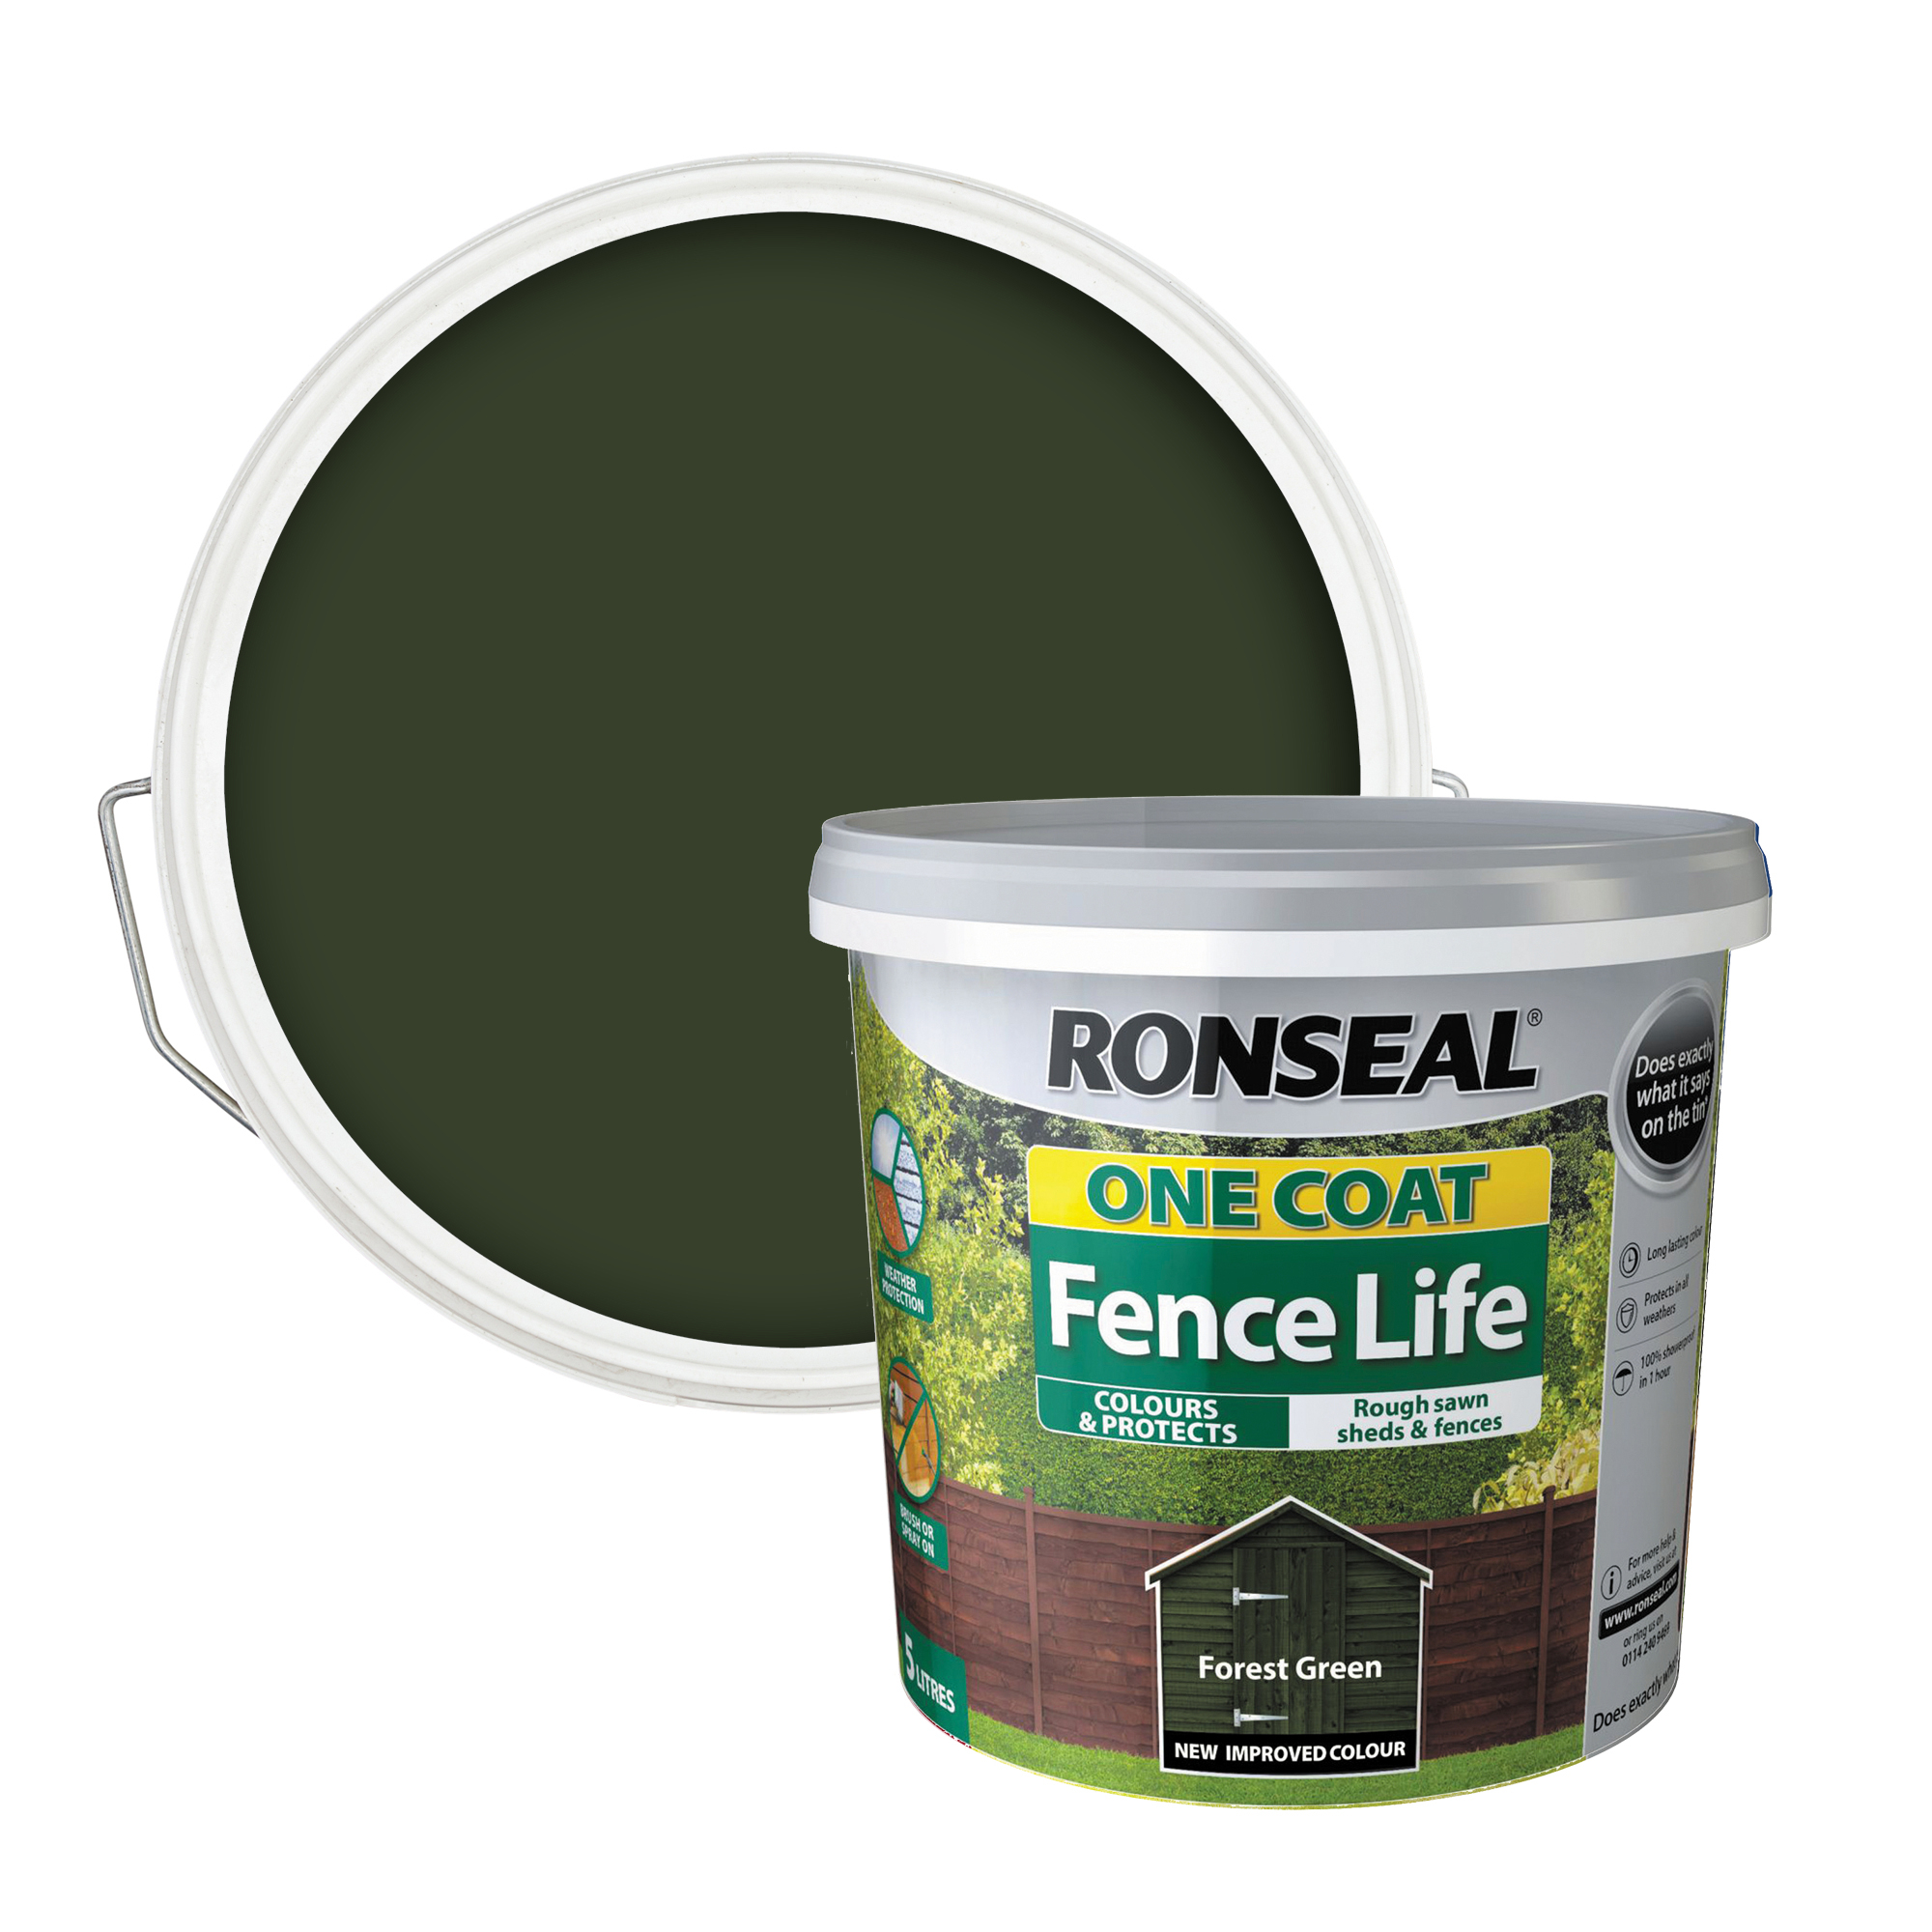 Ronseal One Coat Fence Life Forest Green Exterior Wood Paint 5L Image 1